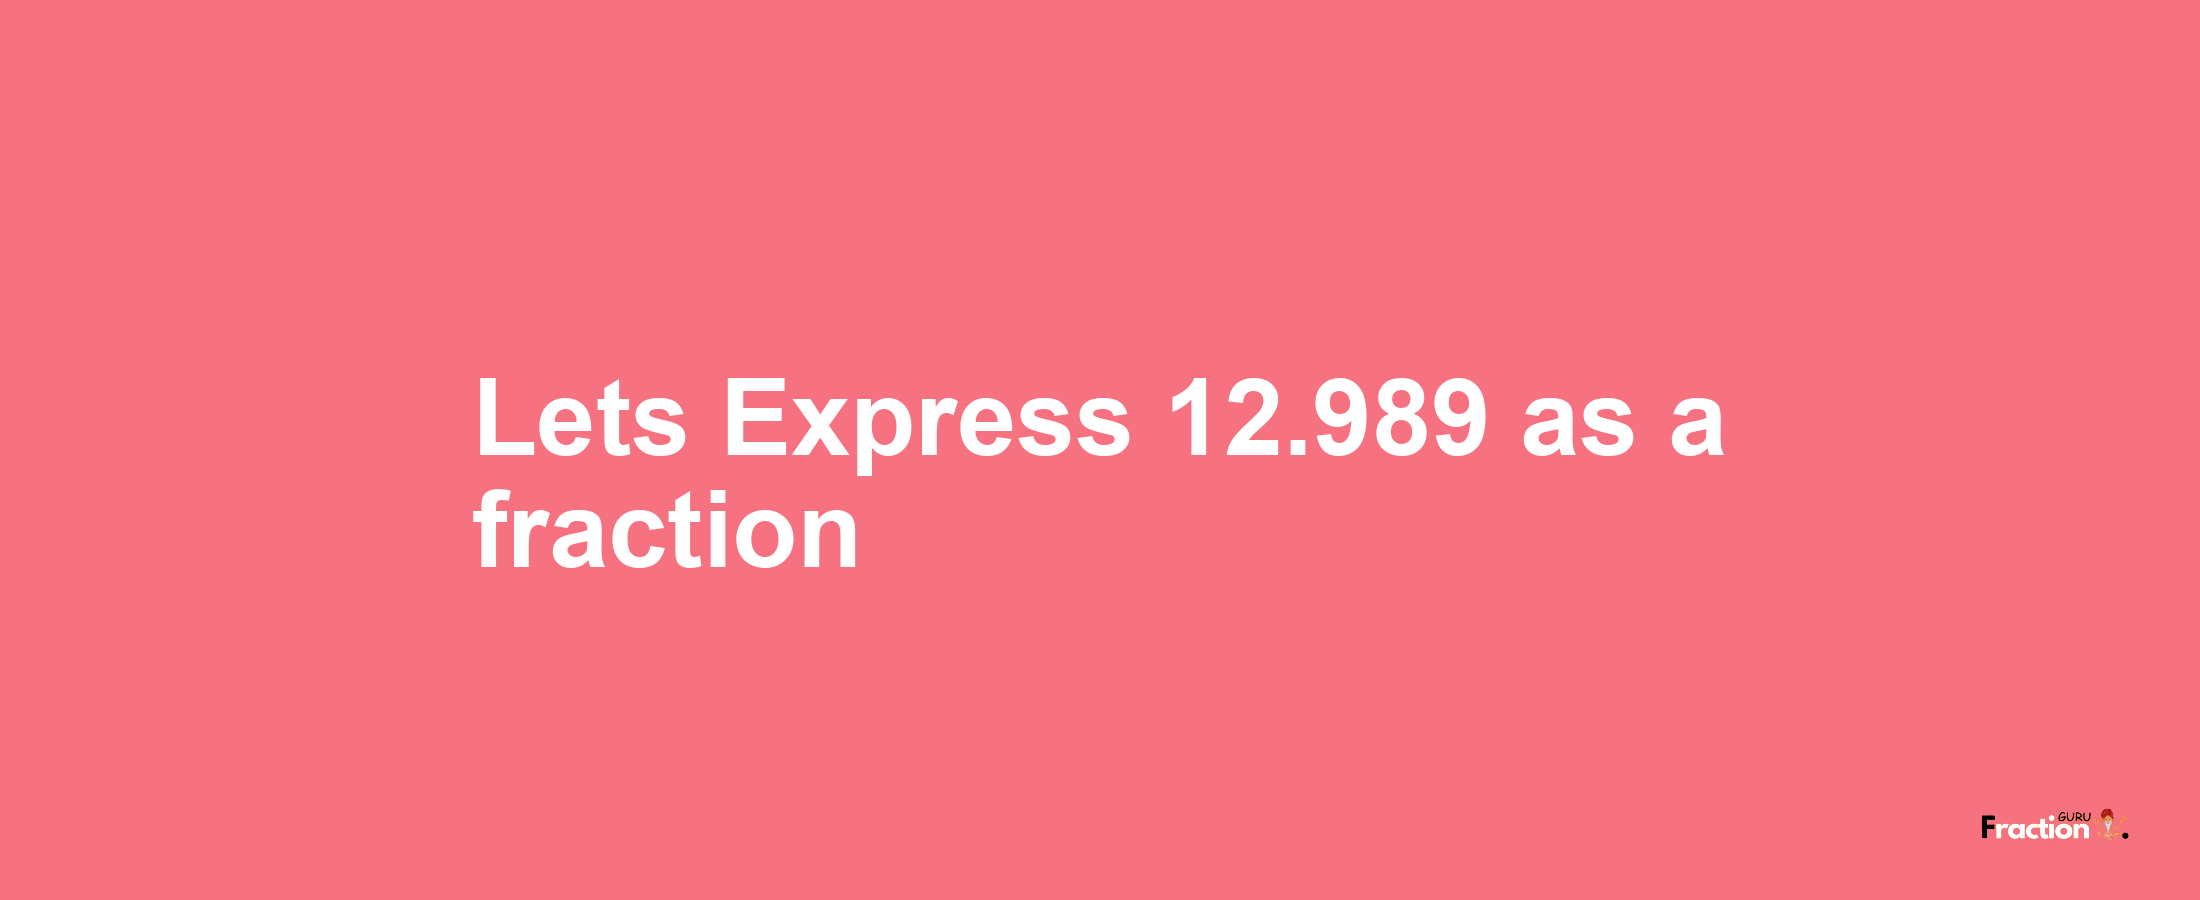 Lets Express 12.989 as afraction